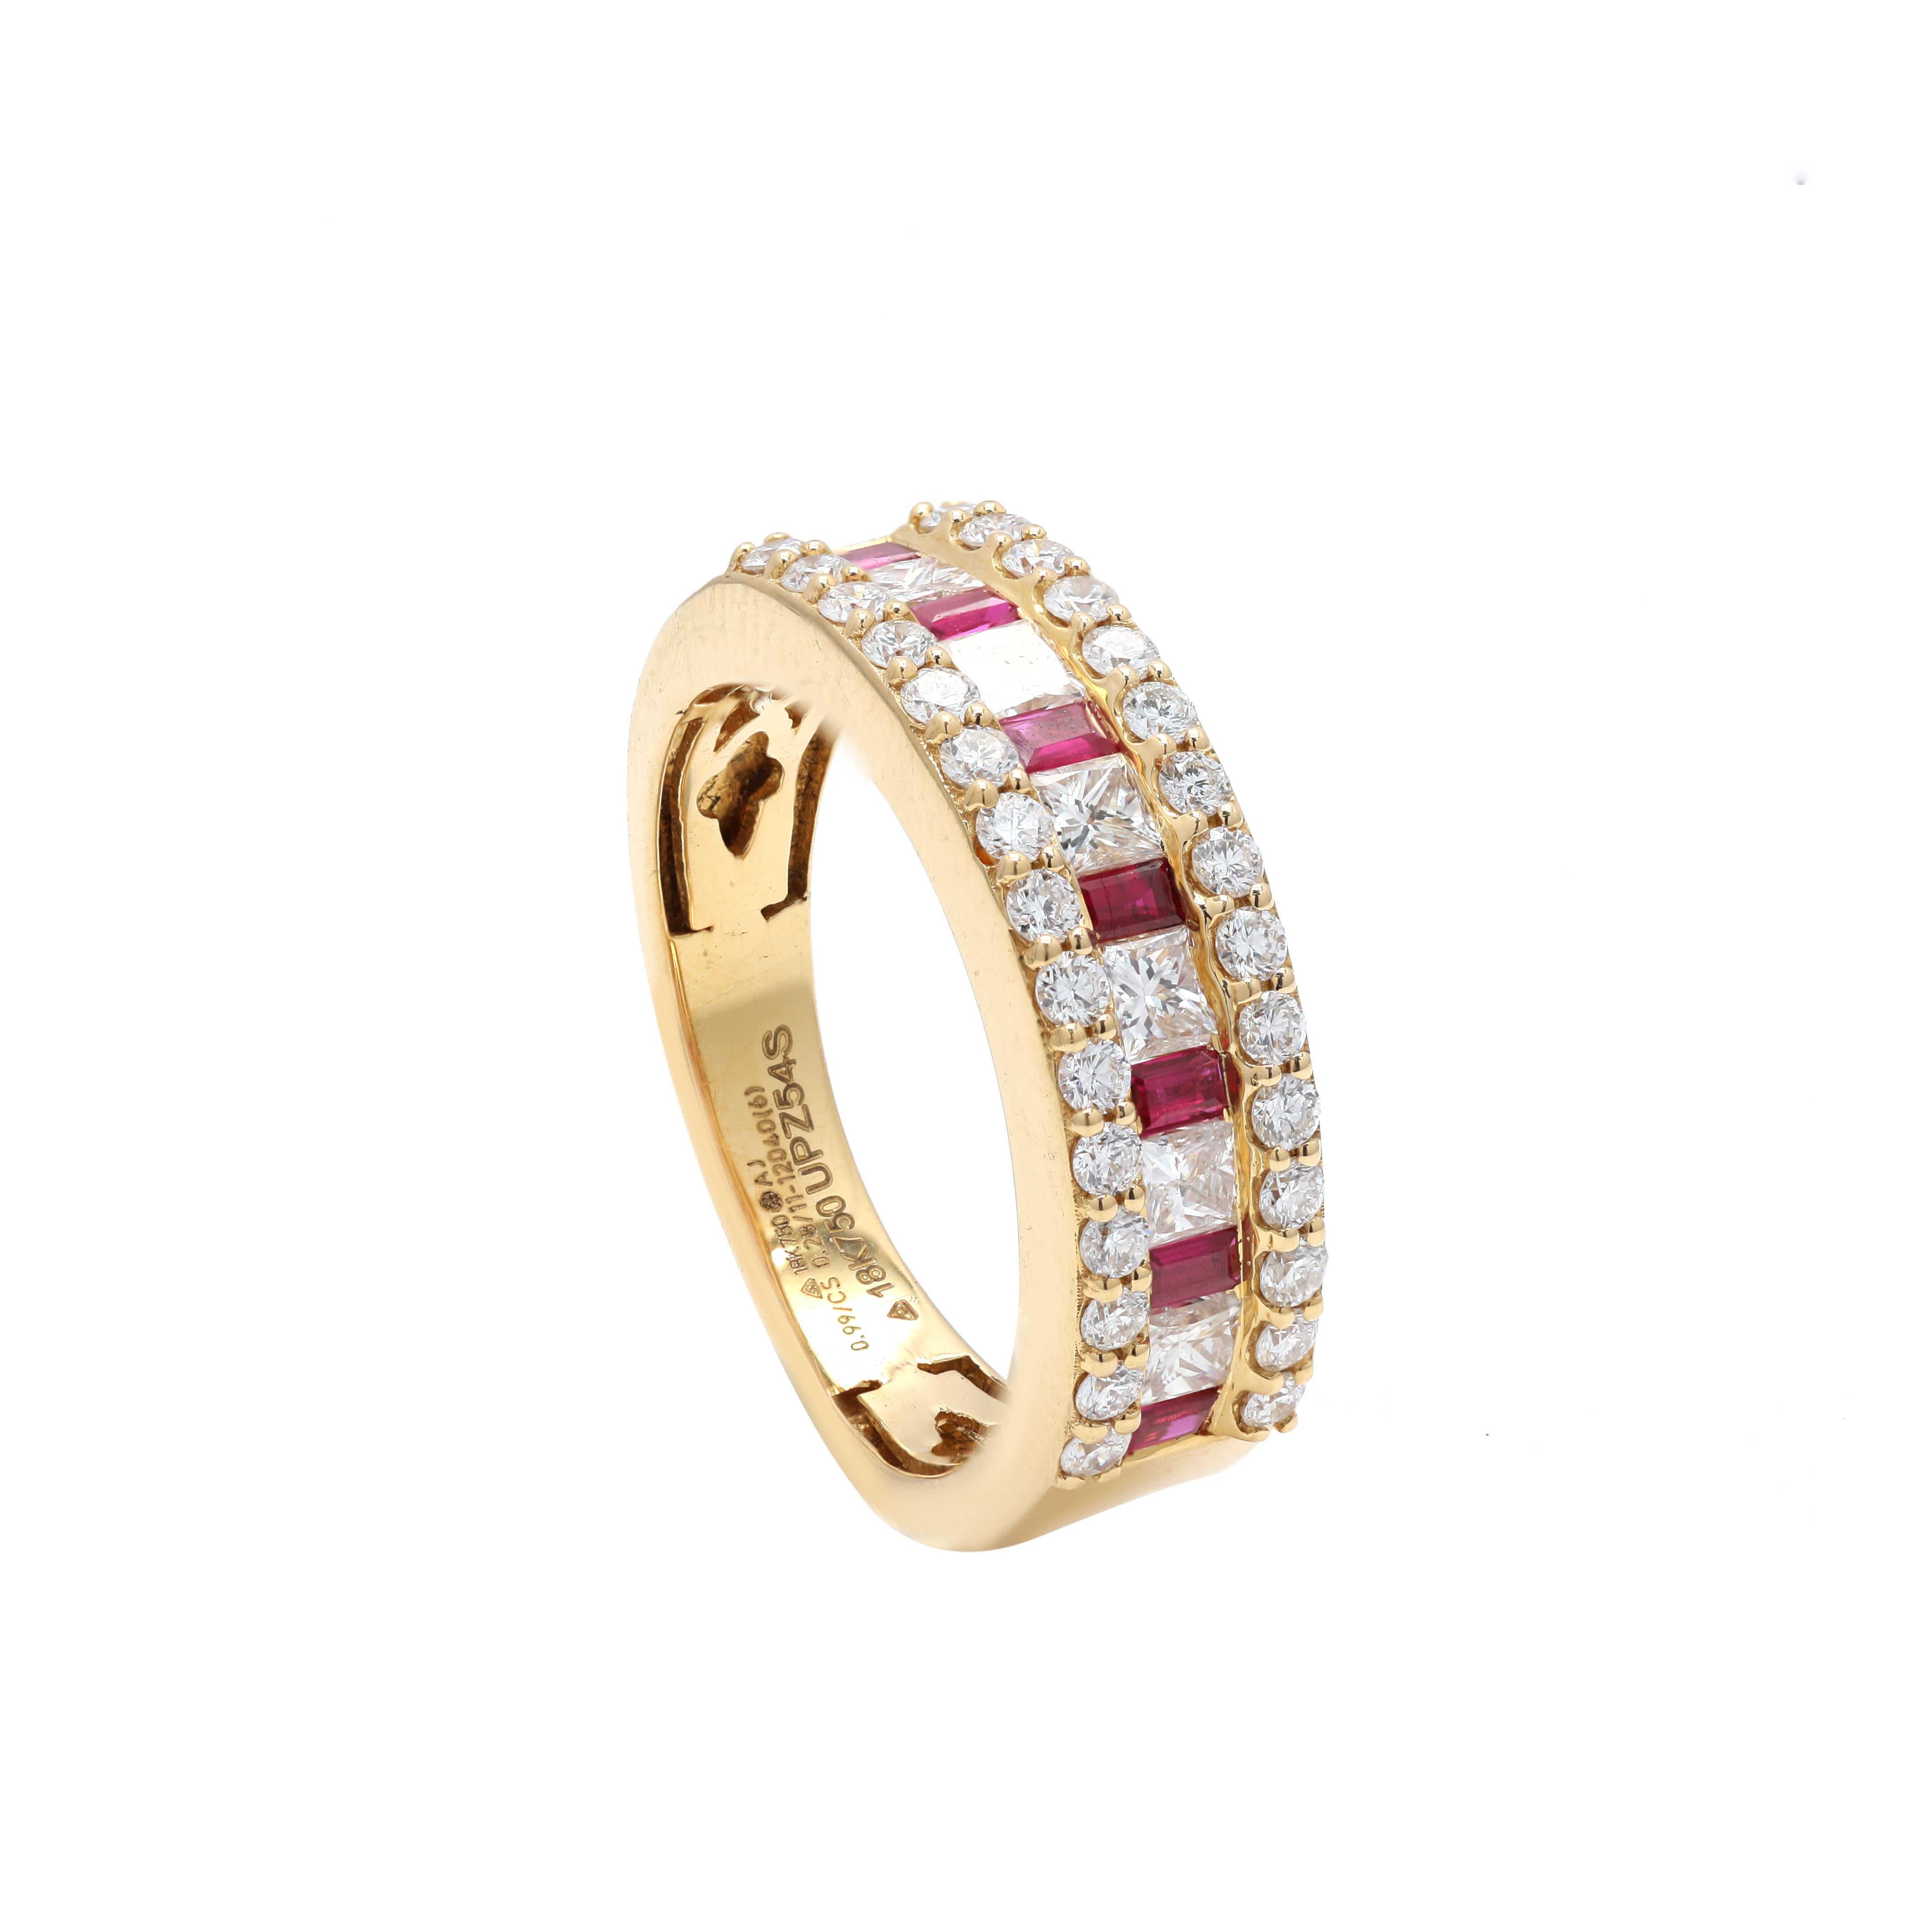 For Sale:  Stackable Half Eternity Ruby Engagement Ring in 18K Yellow Gold with Diamonds 4